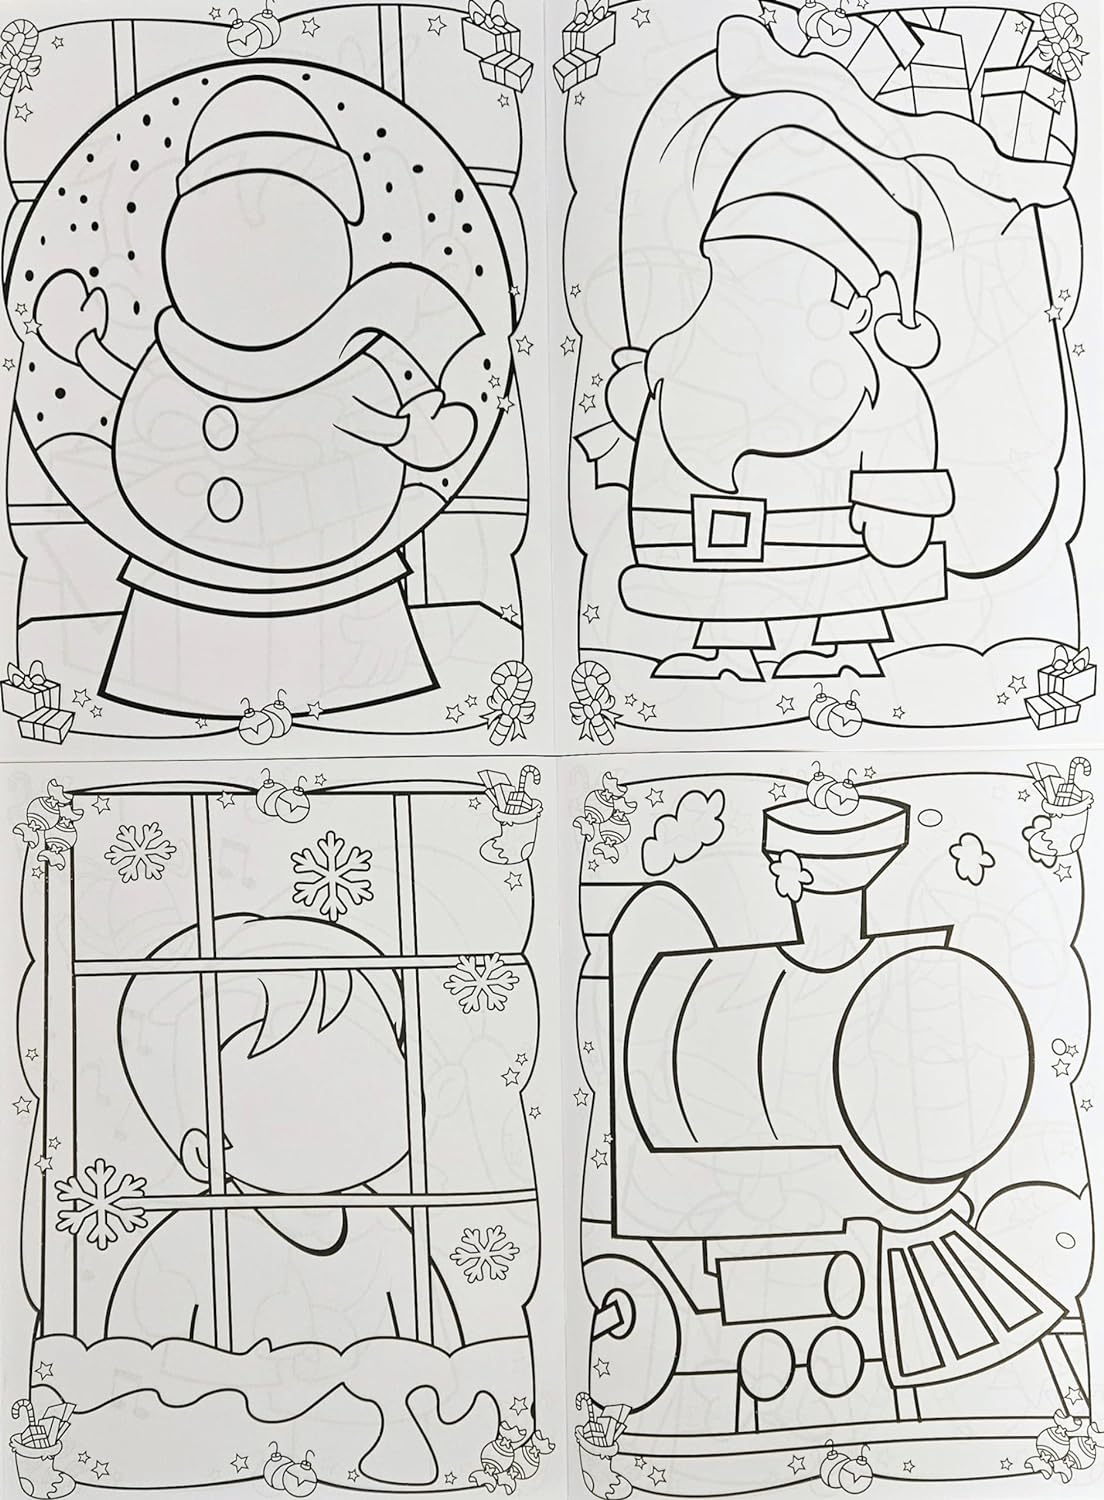 Christmas Funny Faces Sticker Book Set "Happy Holidays" & "Winter Fun"